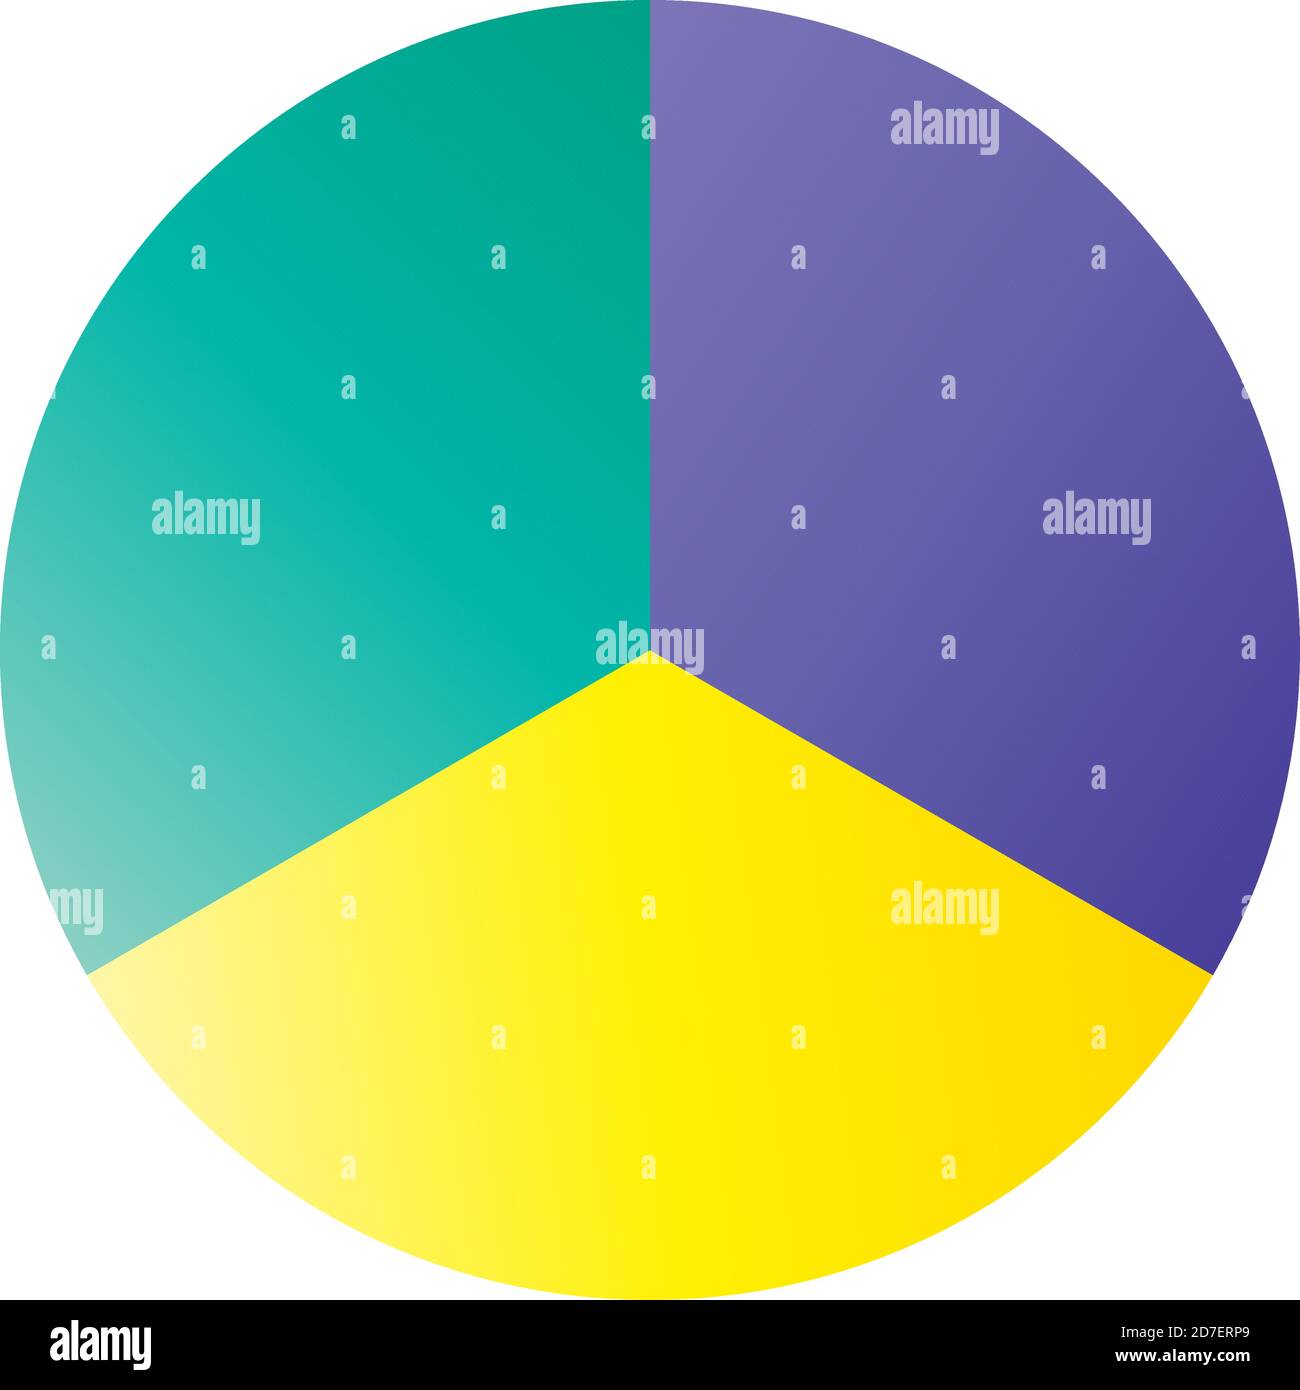 Pie chart, pie graph, diagram segmented circle(s) from 2 to 20 portions ...